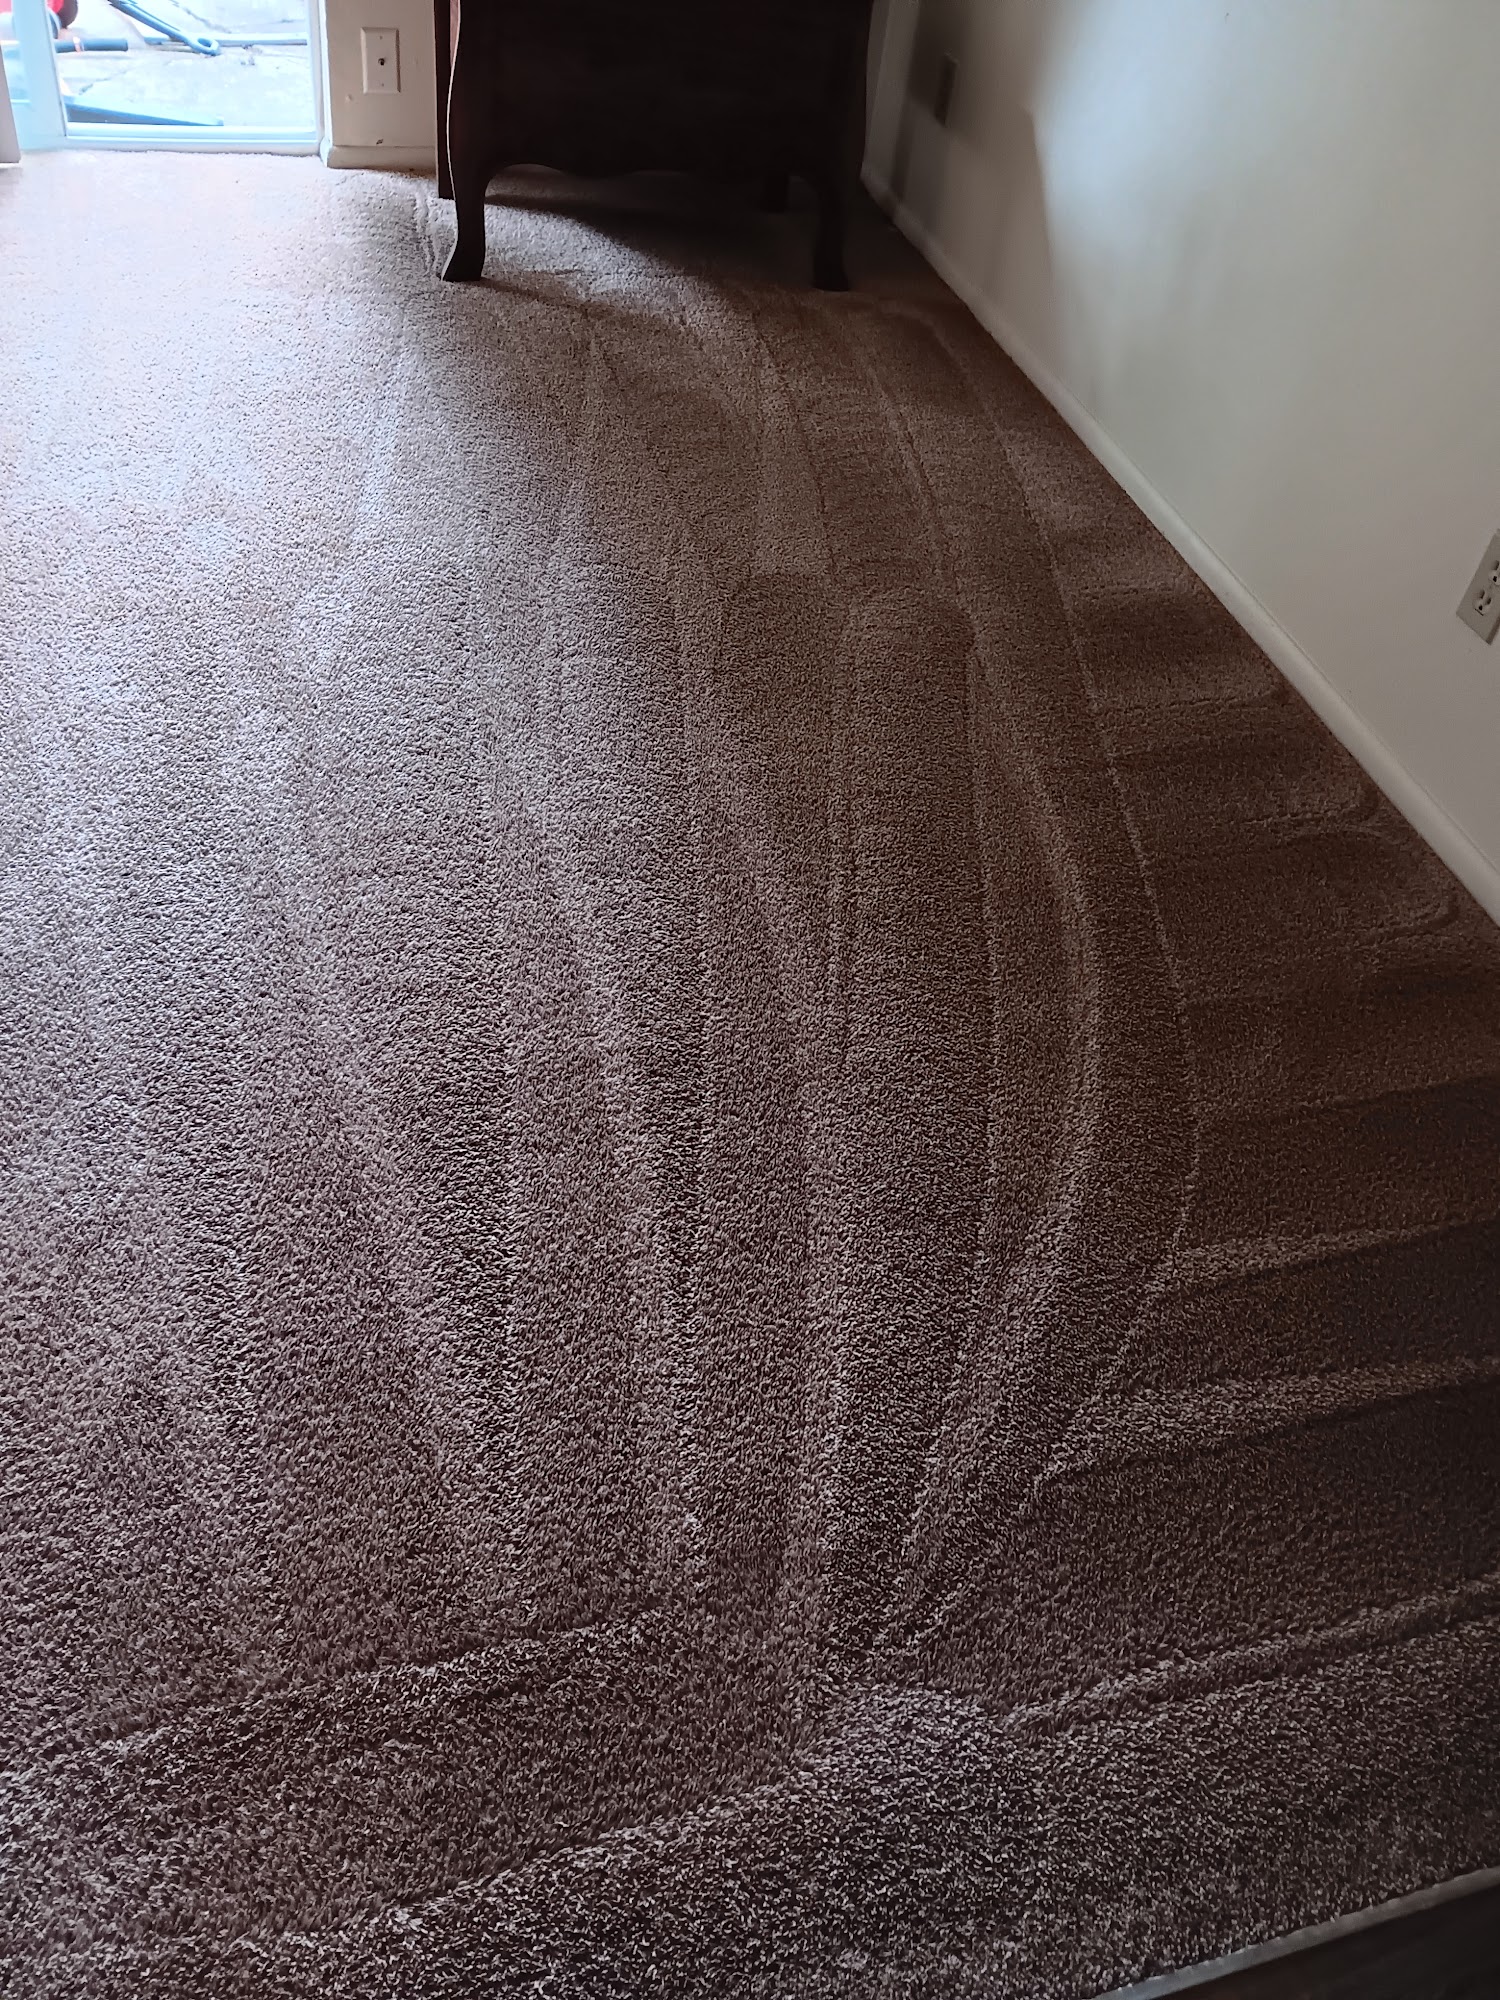 Steam Time Carpet Cleaning